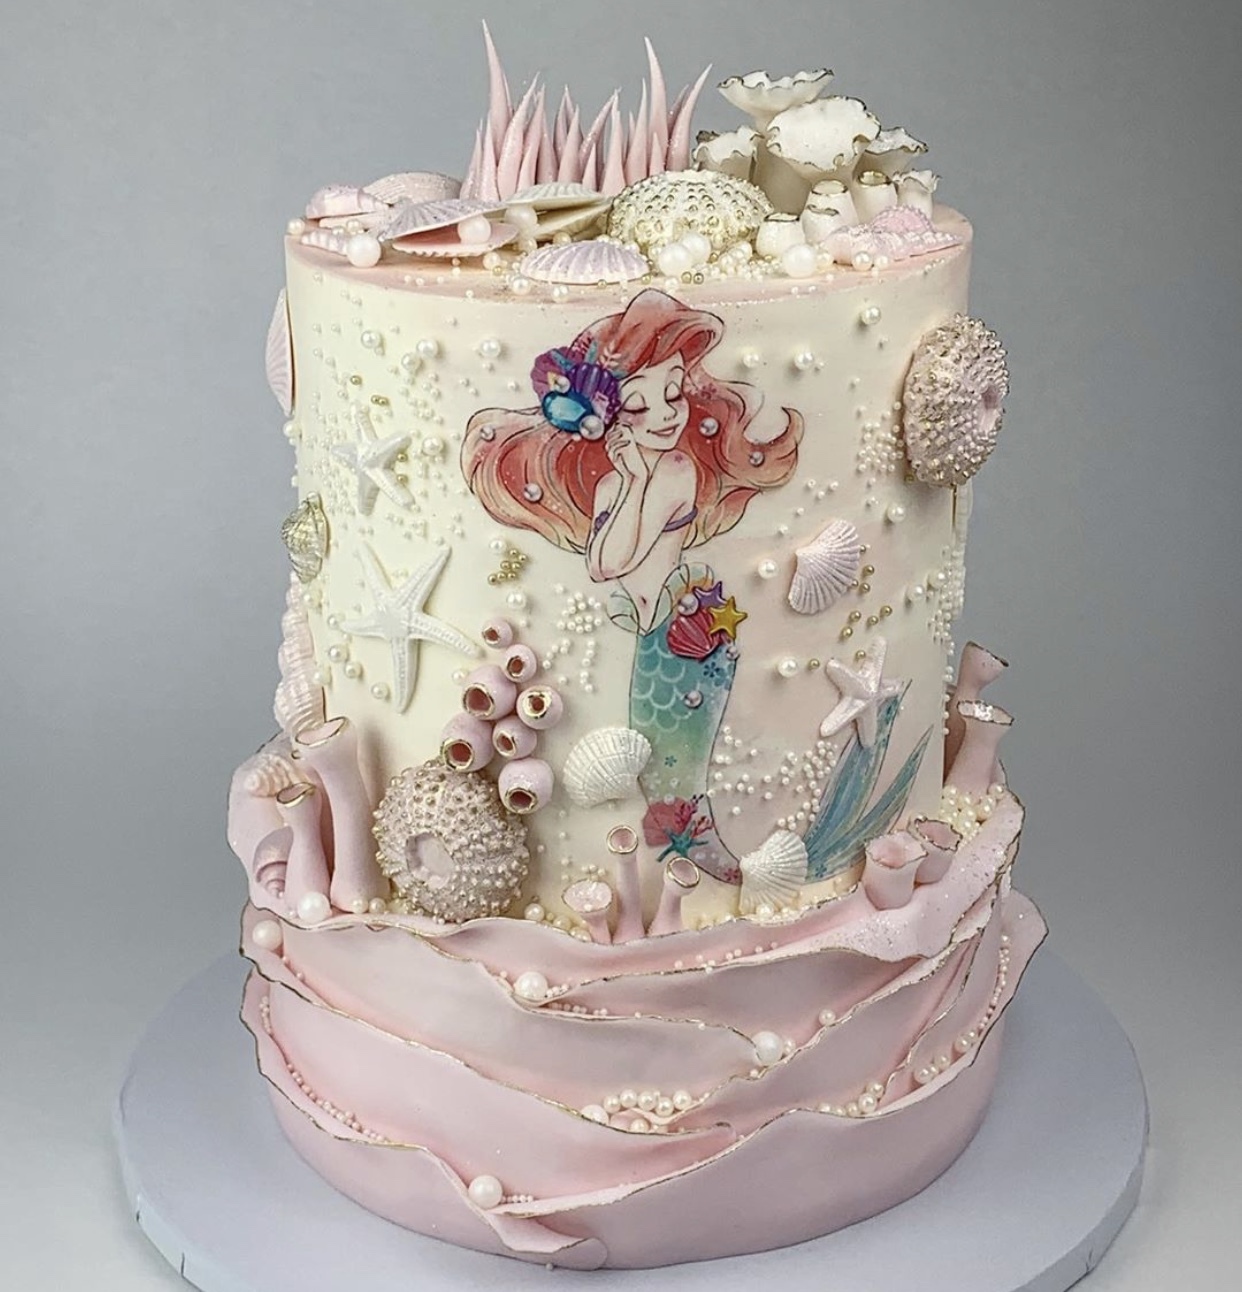 The Little Mermaid Character Cake – The Cake People